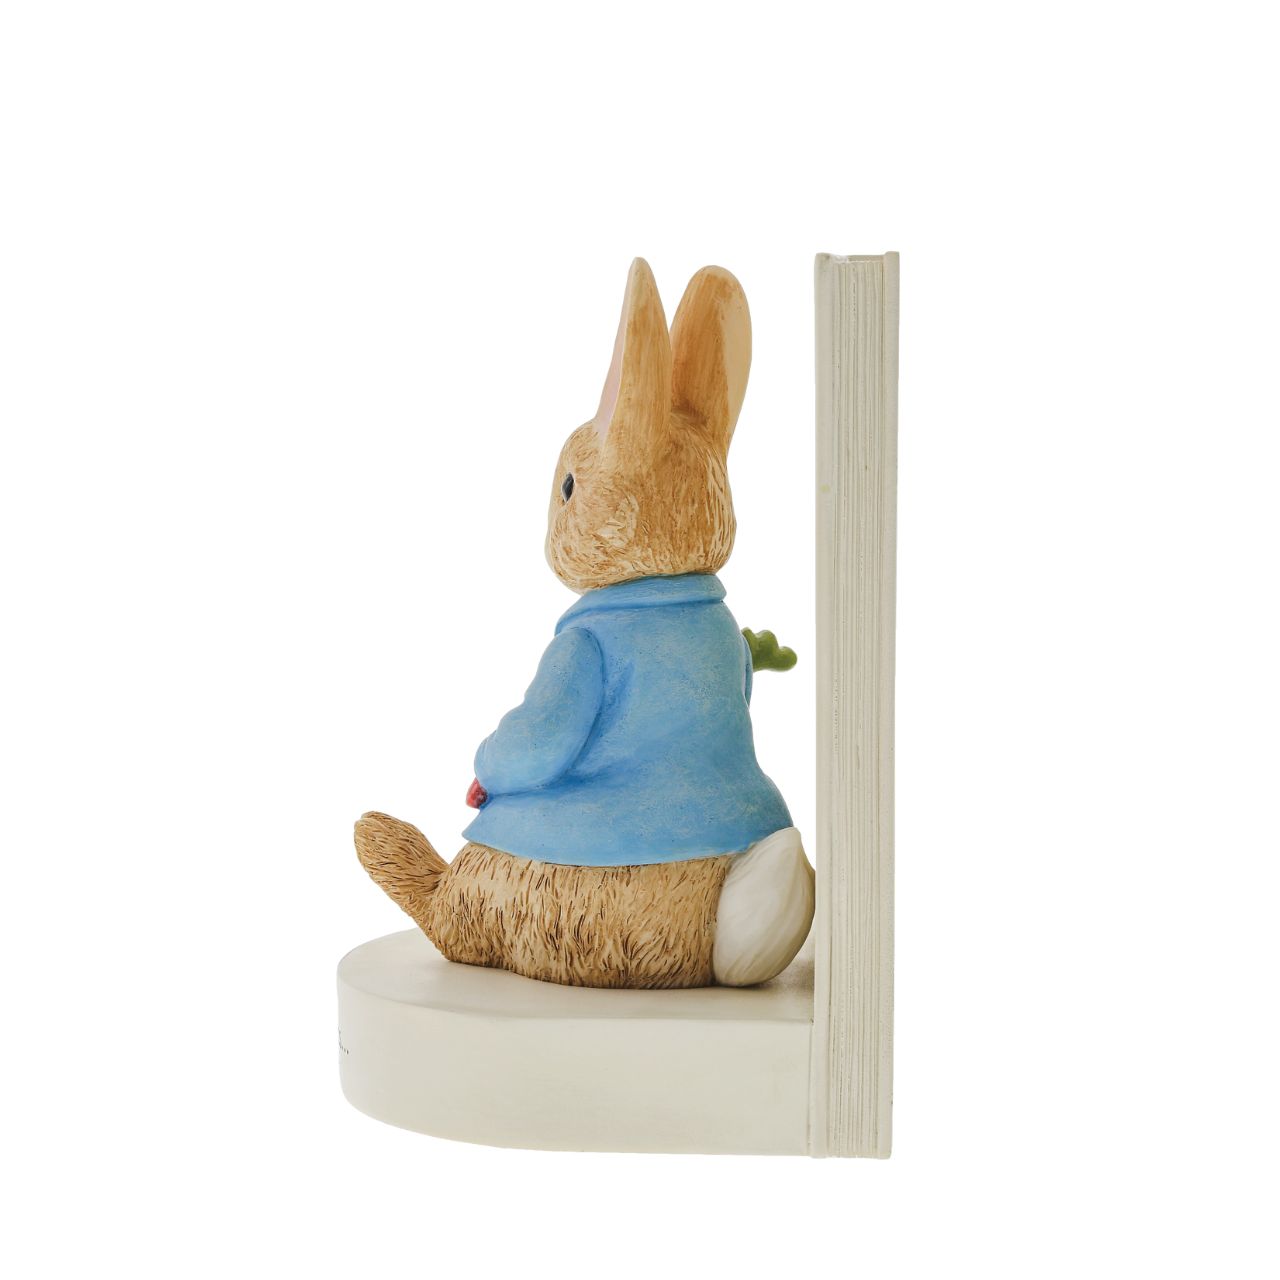 Beatrix Potter Peter Rabbit Book Stop  An ornamental Peter Rabbit bookend, designed with the famous Tale of Peter Rabbit book in mind. An ideal accessory for the living room, home office or home library space. This book stop makes the ideal collector's piece or gift.